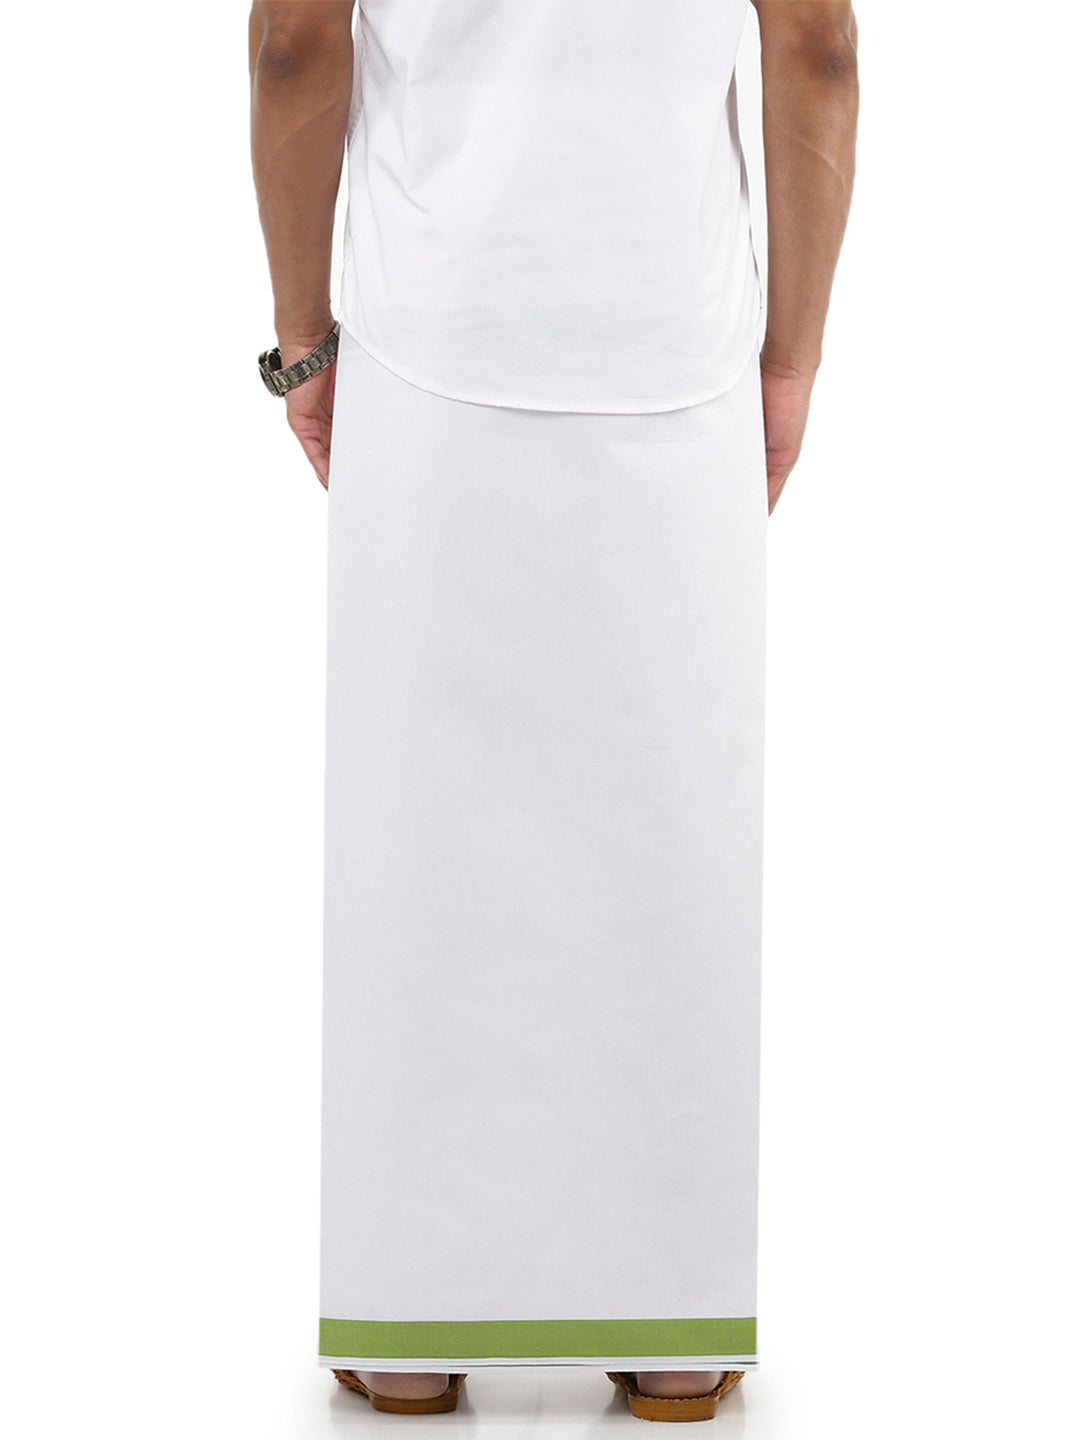 Mens Double Dhoti White with Fancy Border Anchor Special Chutney Green-Back view